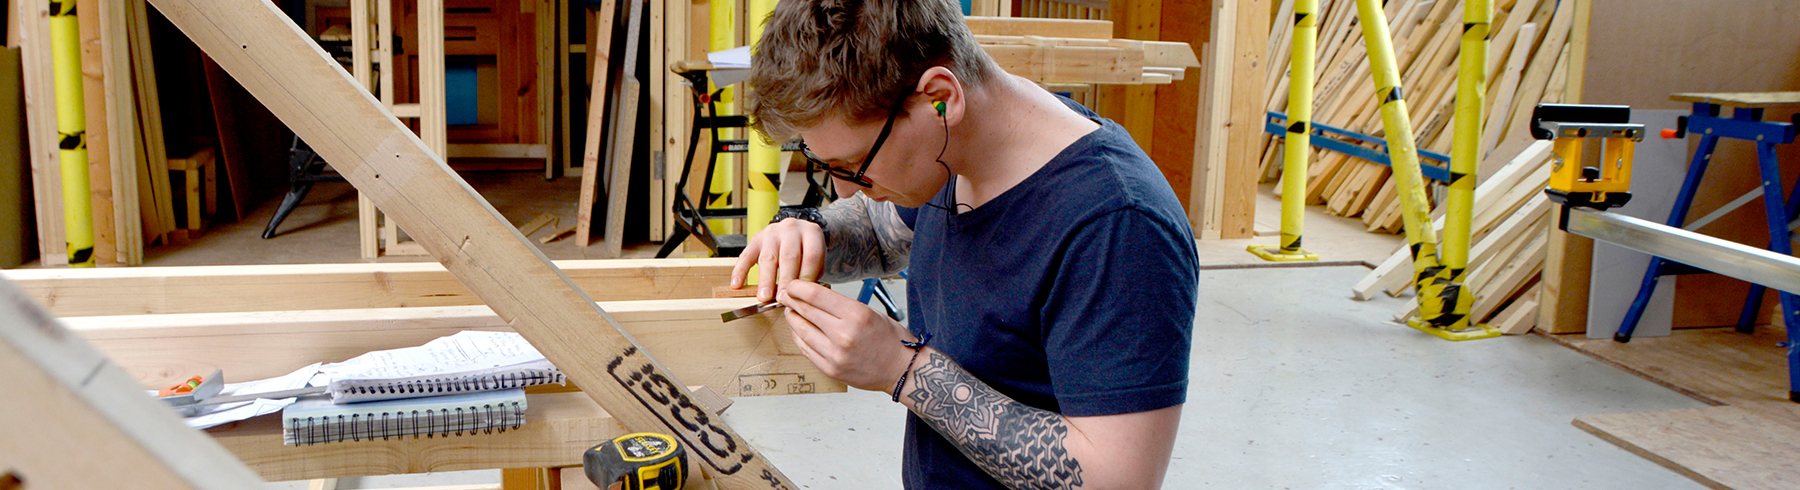 Carpentry & Joinery Courses in Hertfordshire